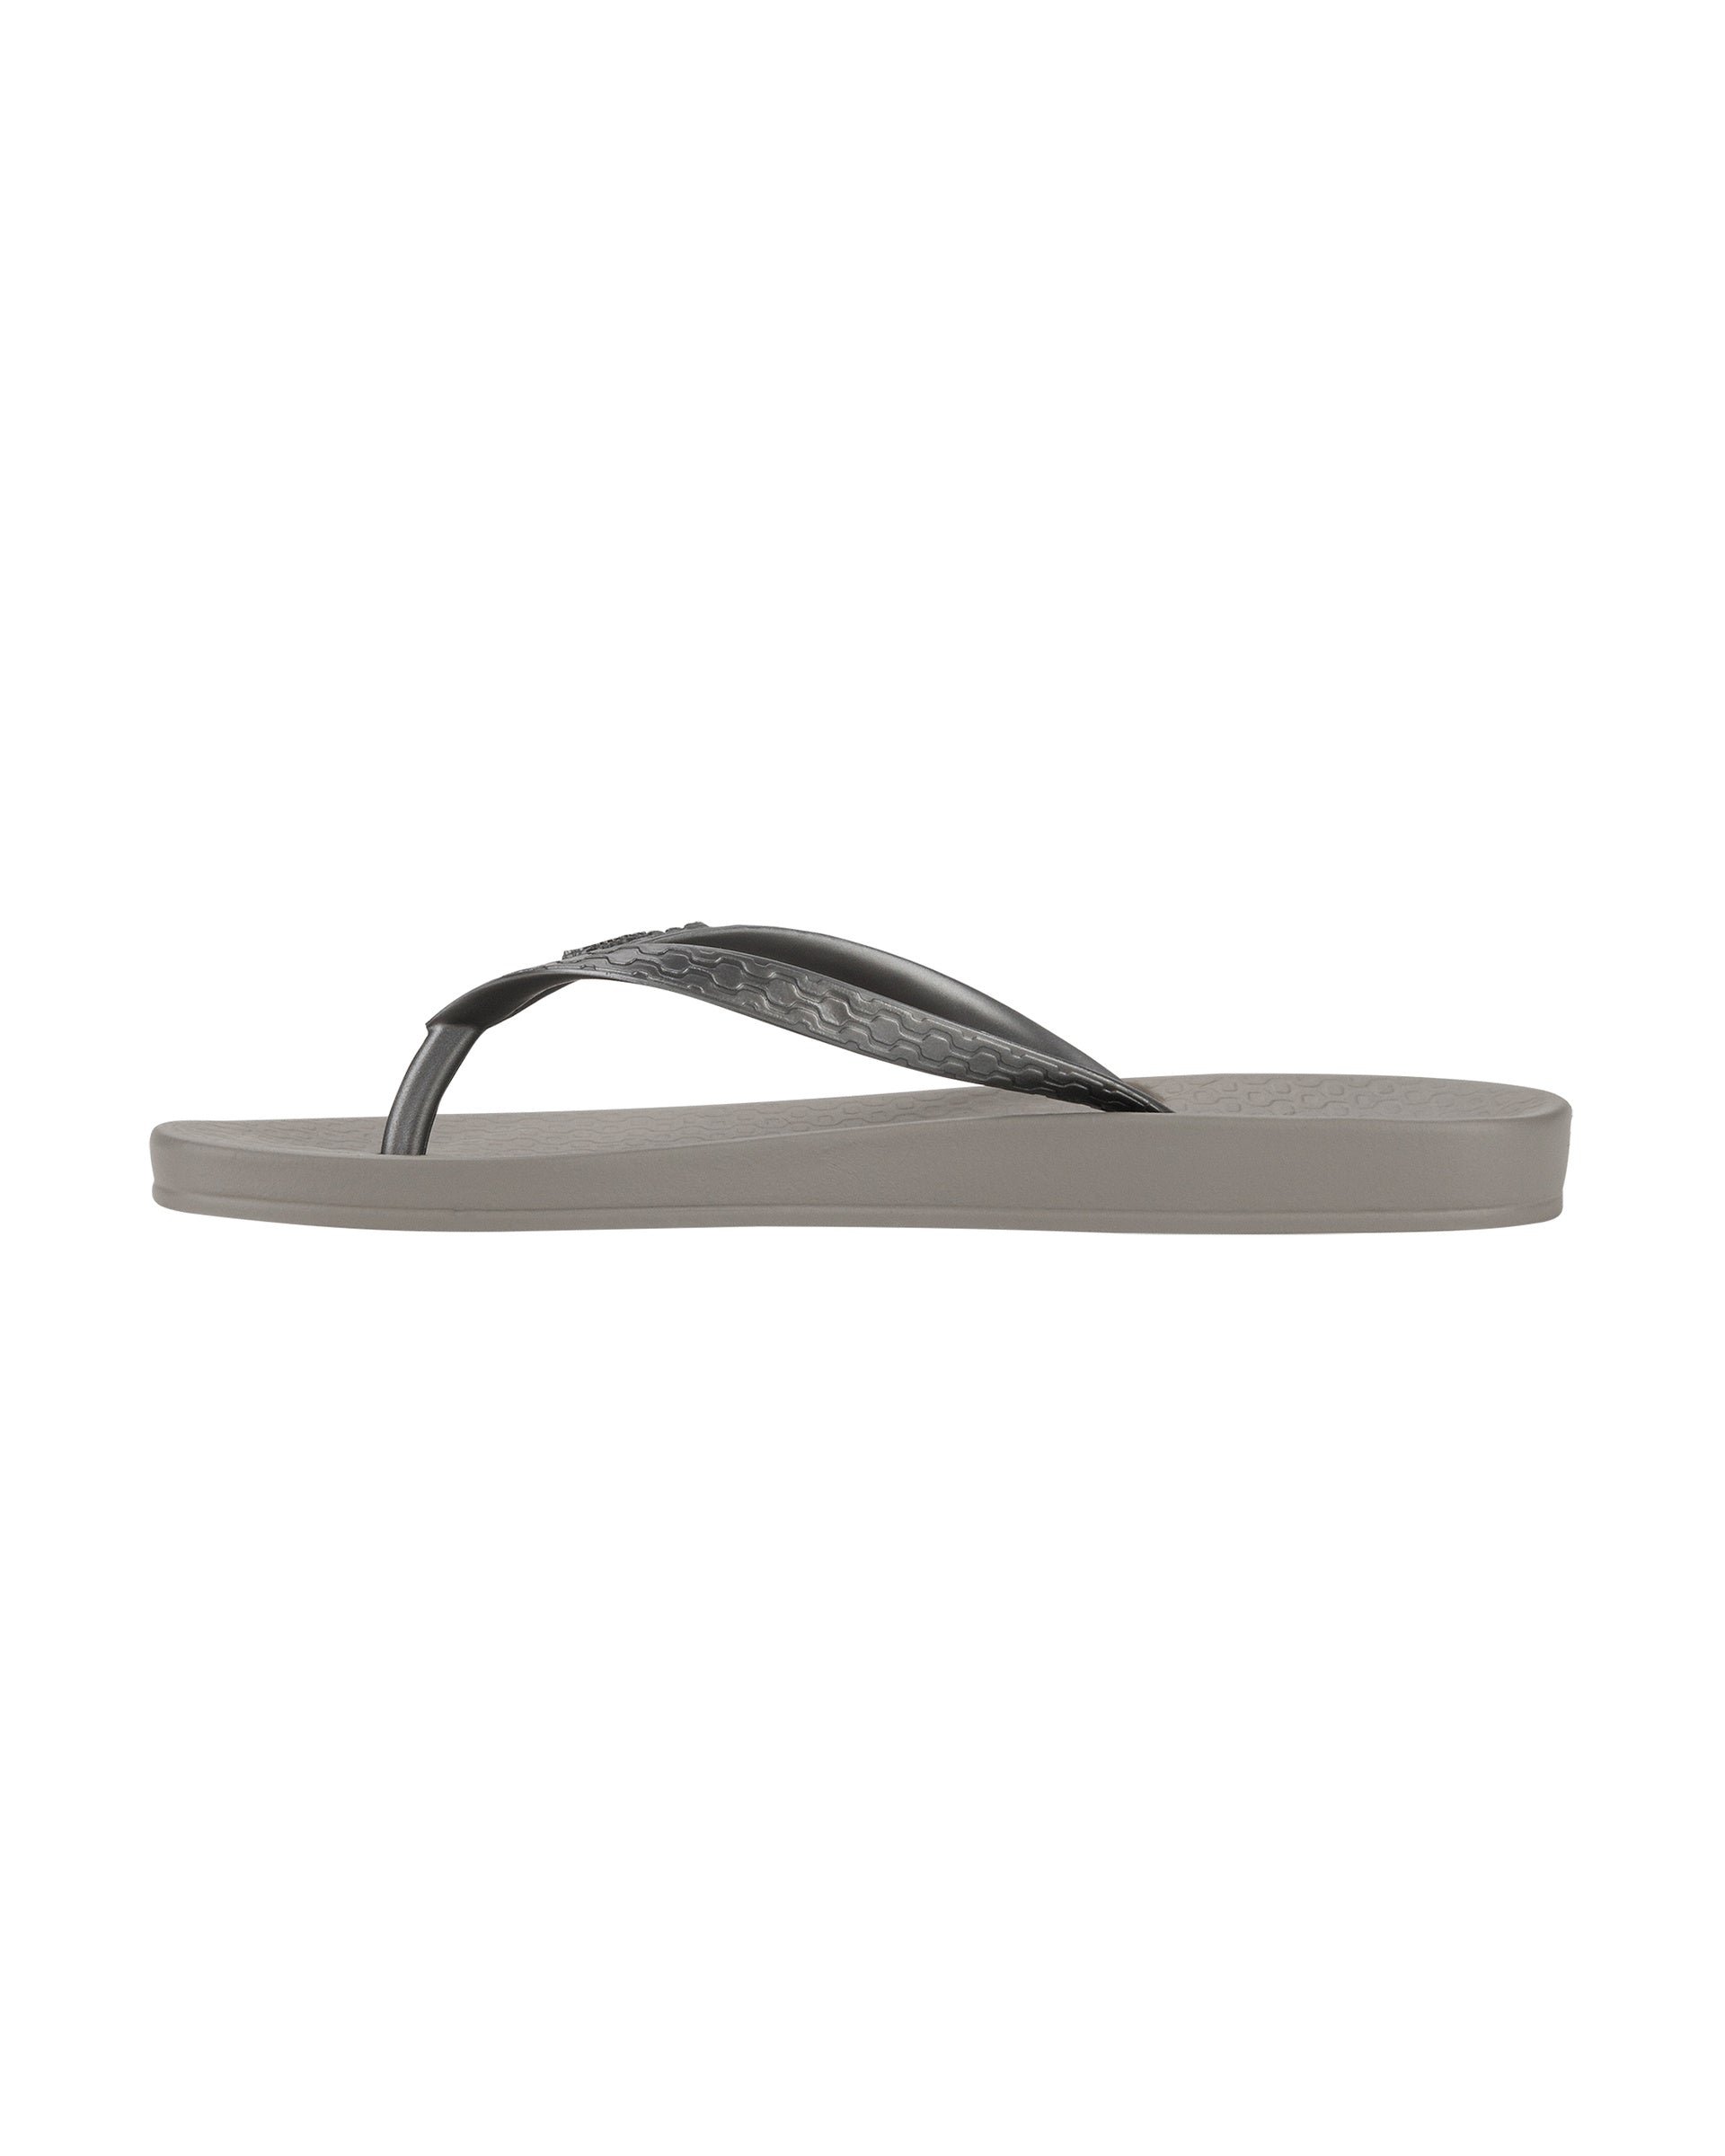 Inner side view of a grey Ipanema Ana Tan women's flip flop.